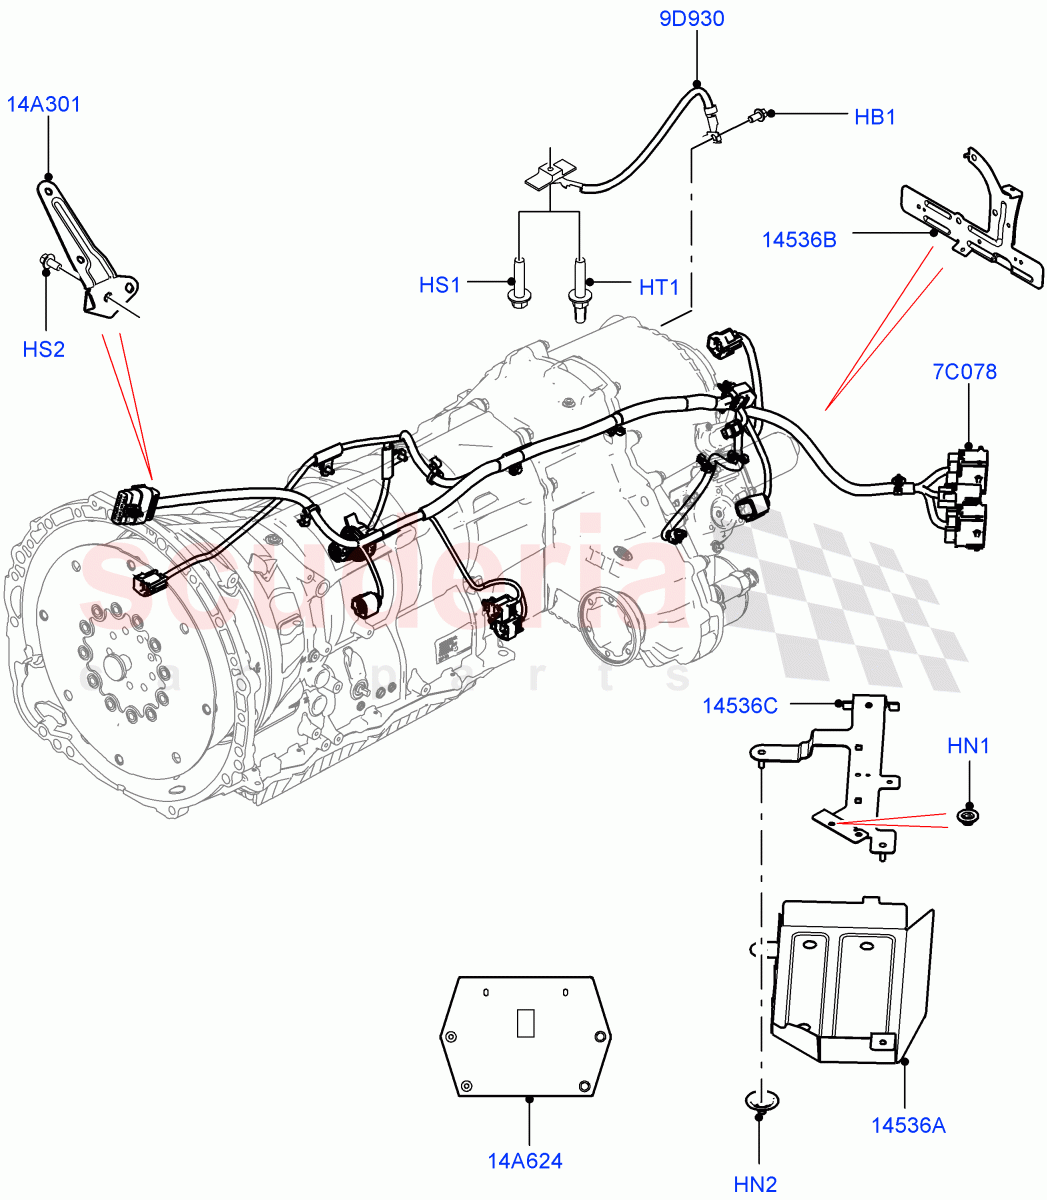 Electrical Wiring - Engine And Dash(Transmission)((V)TOFA999999) of Land Rover Land Rover Range Rover Sport (2014+) [2.0 Turbo Petrol AJ200P]